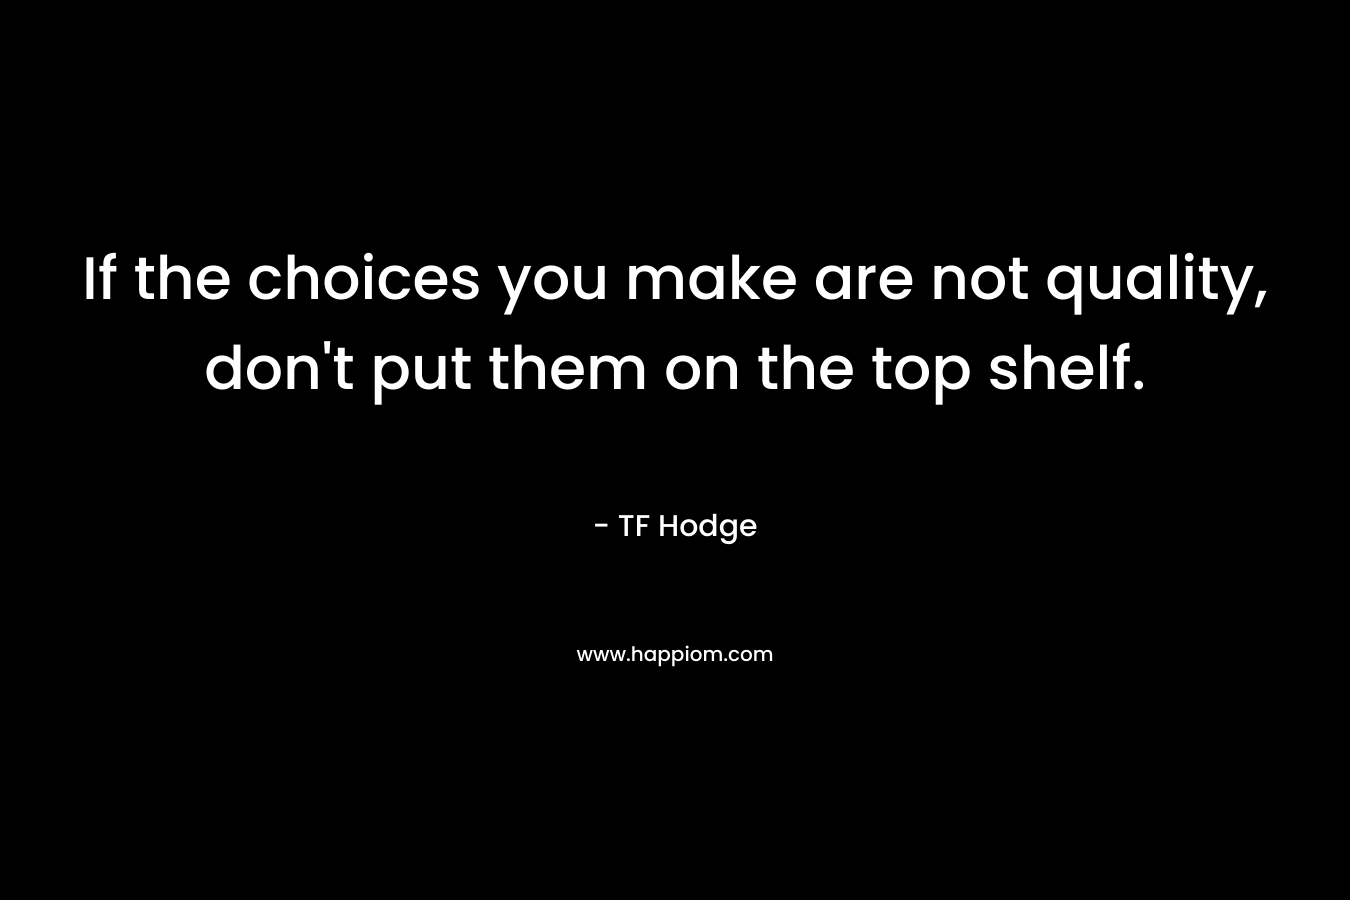 If the choices you make are not quality, don't put them on the top shelf.